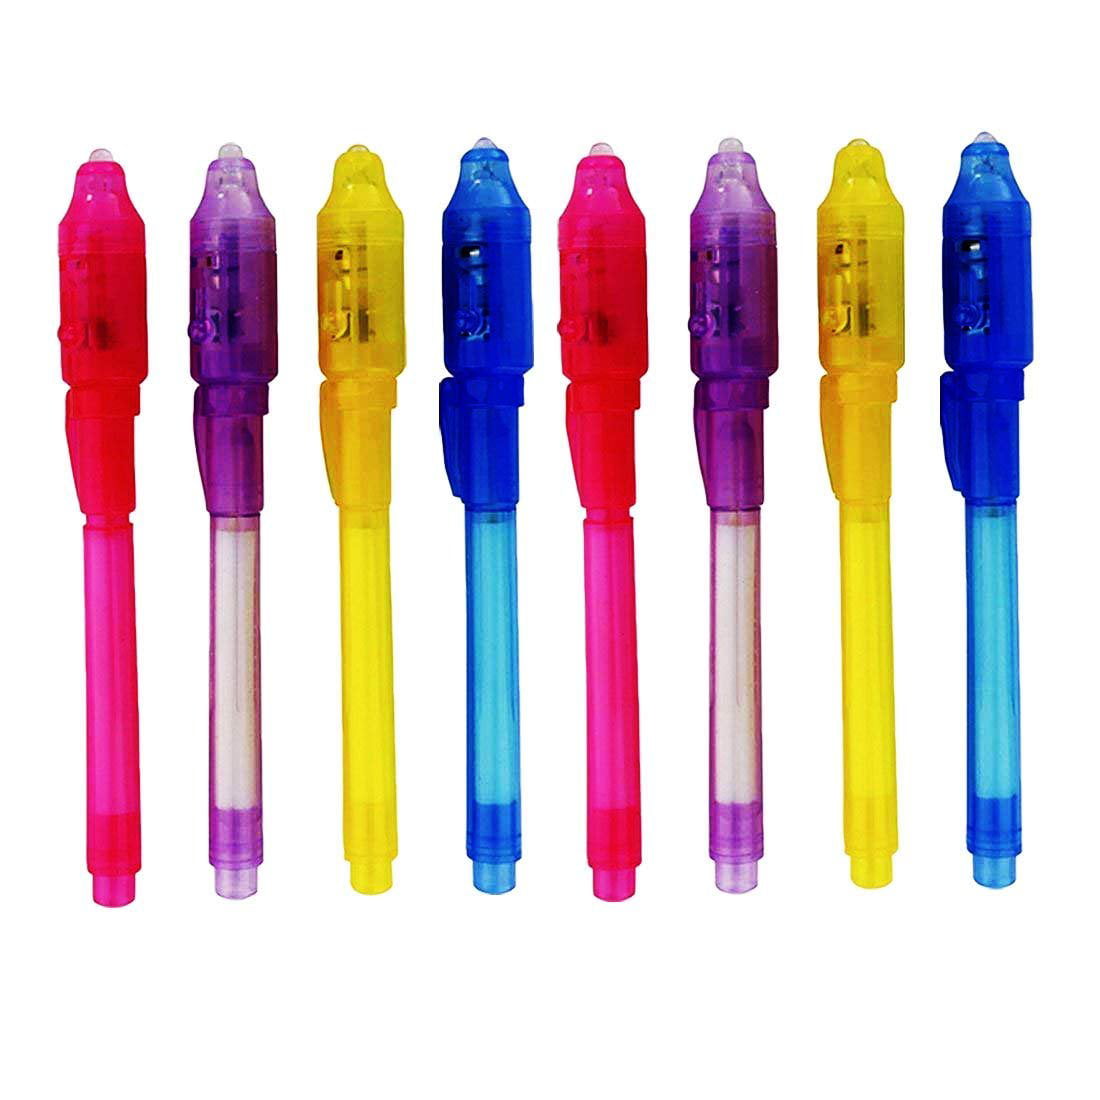 haninetrosty Invisible Pen with UV Light Secret Message Pens Pack of 4